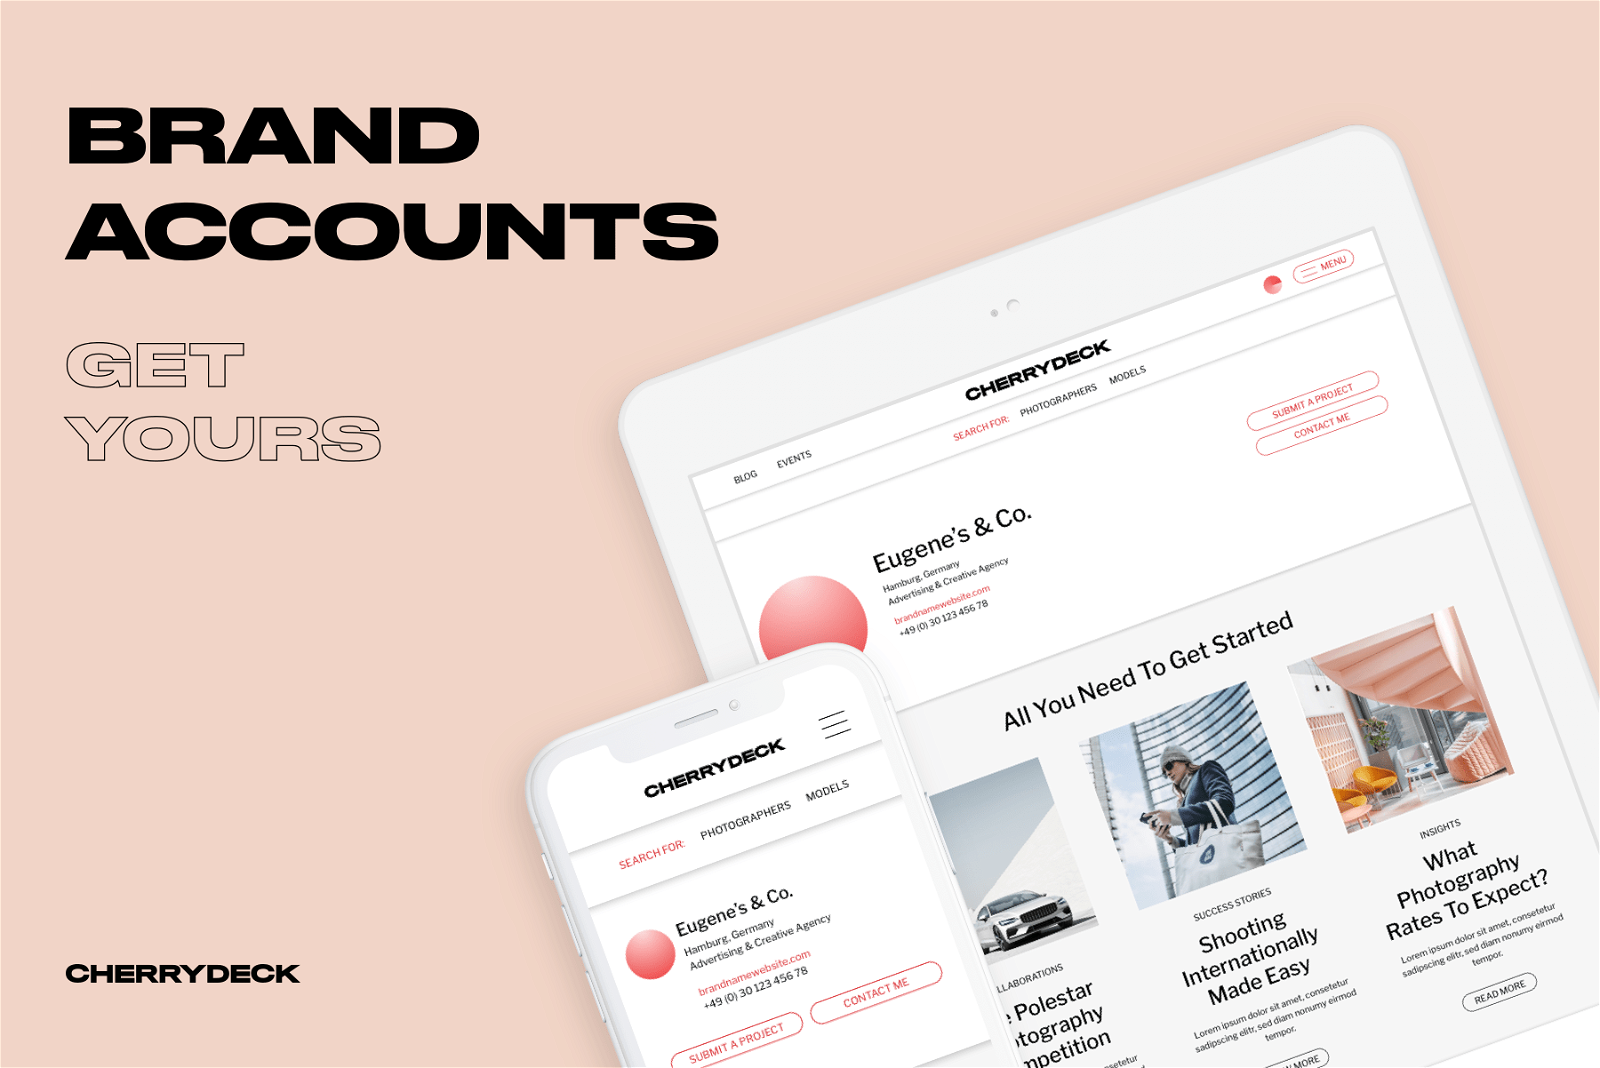 Brand Accounts on Cherrydeck Launch